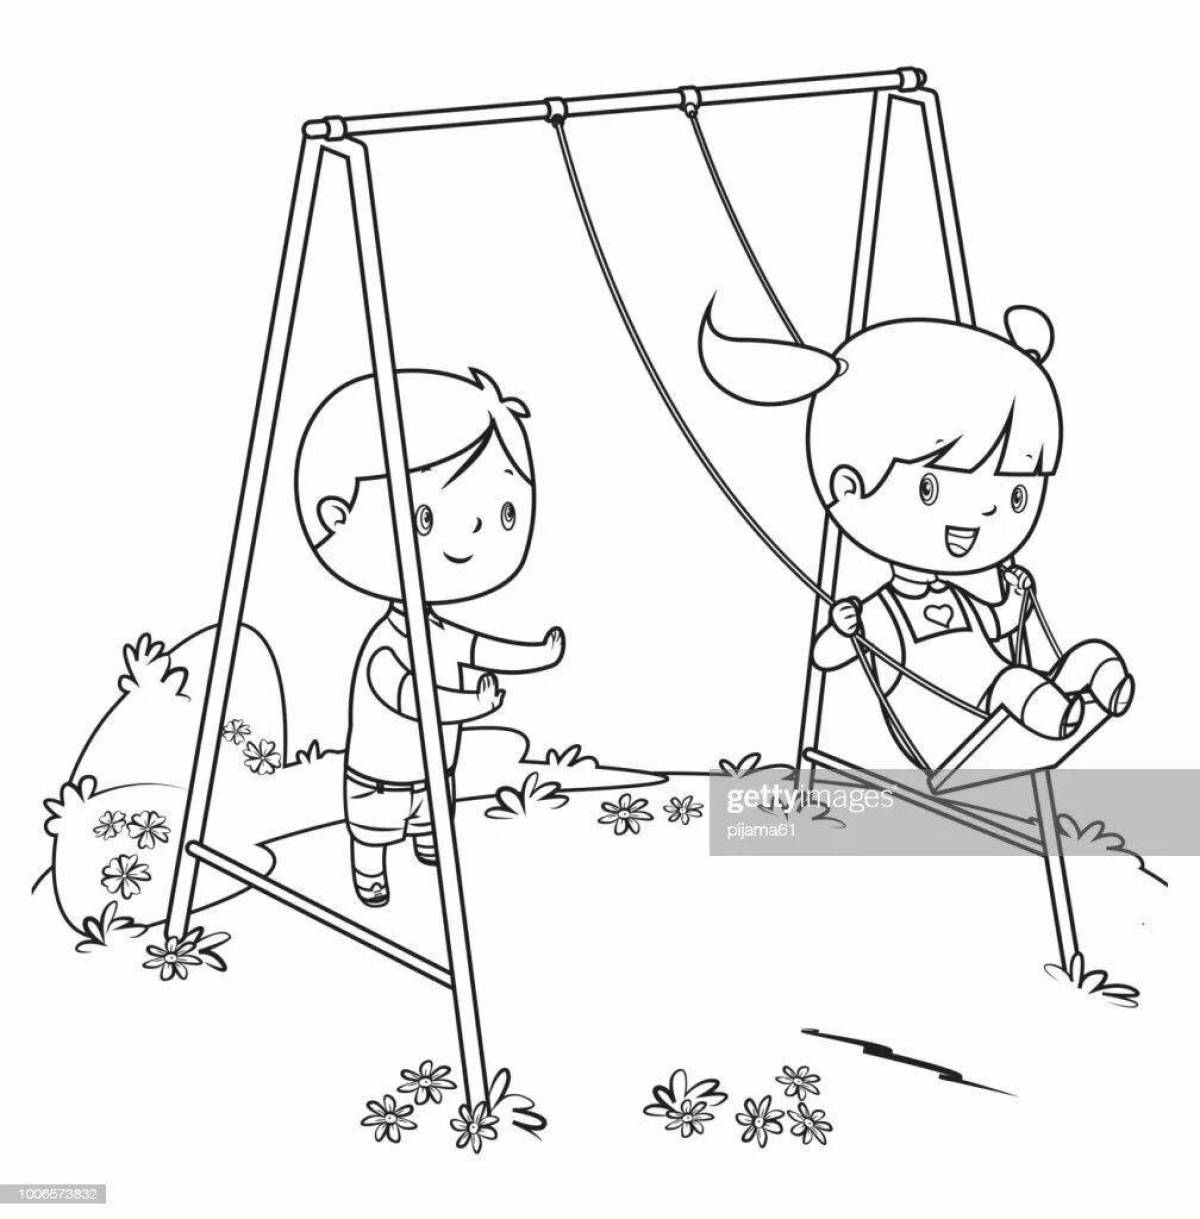 Animated girl on a swing coloring book